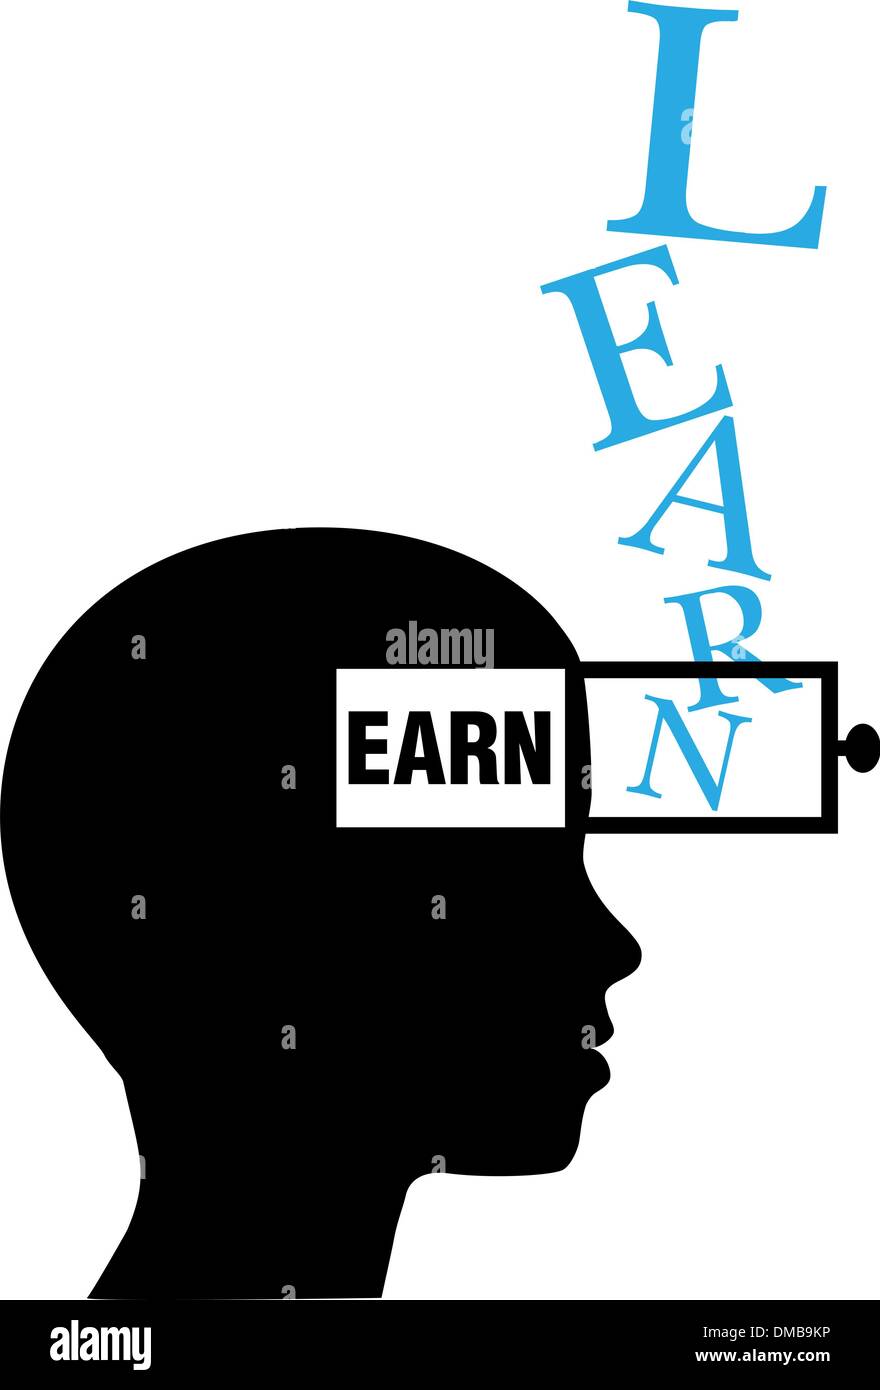 Person silhouette learn to earn education Stock Vector